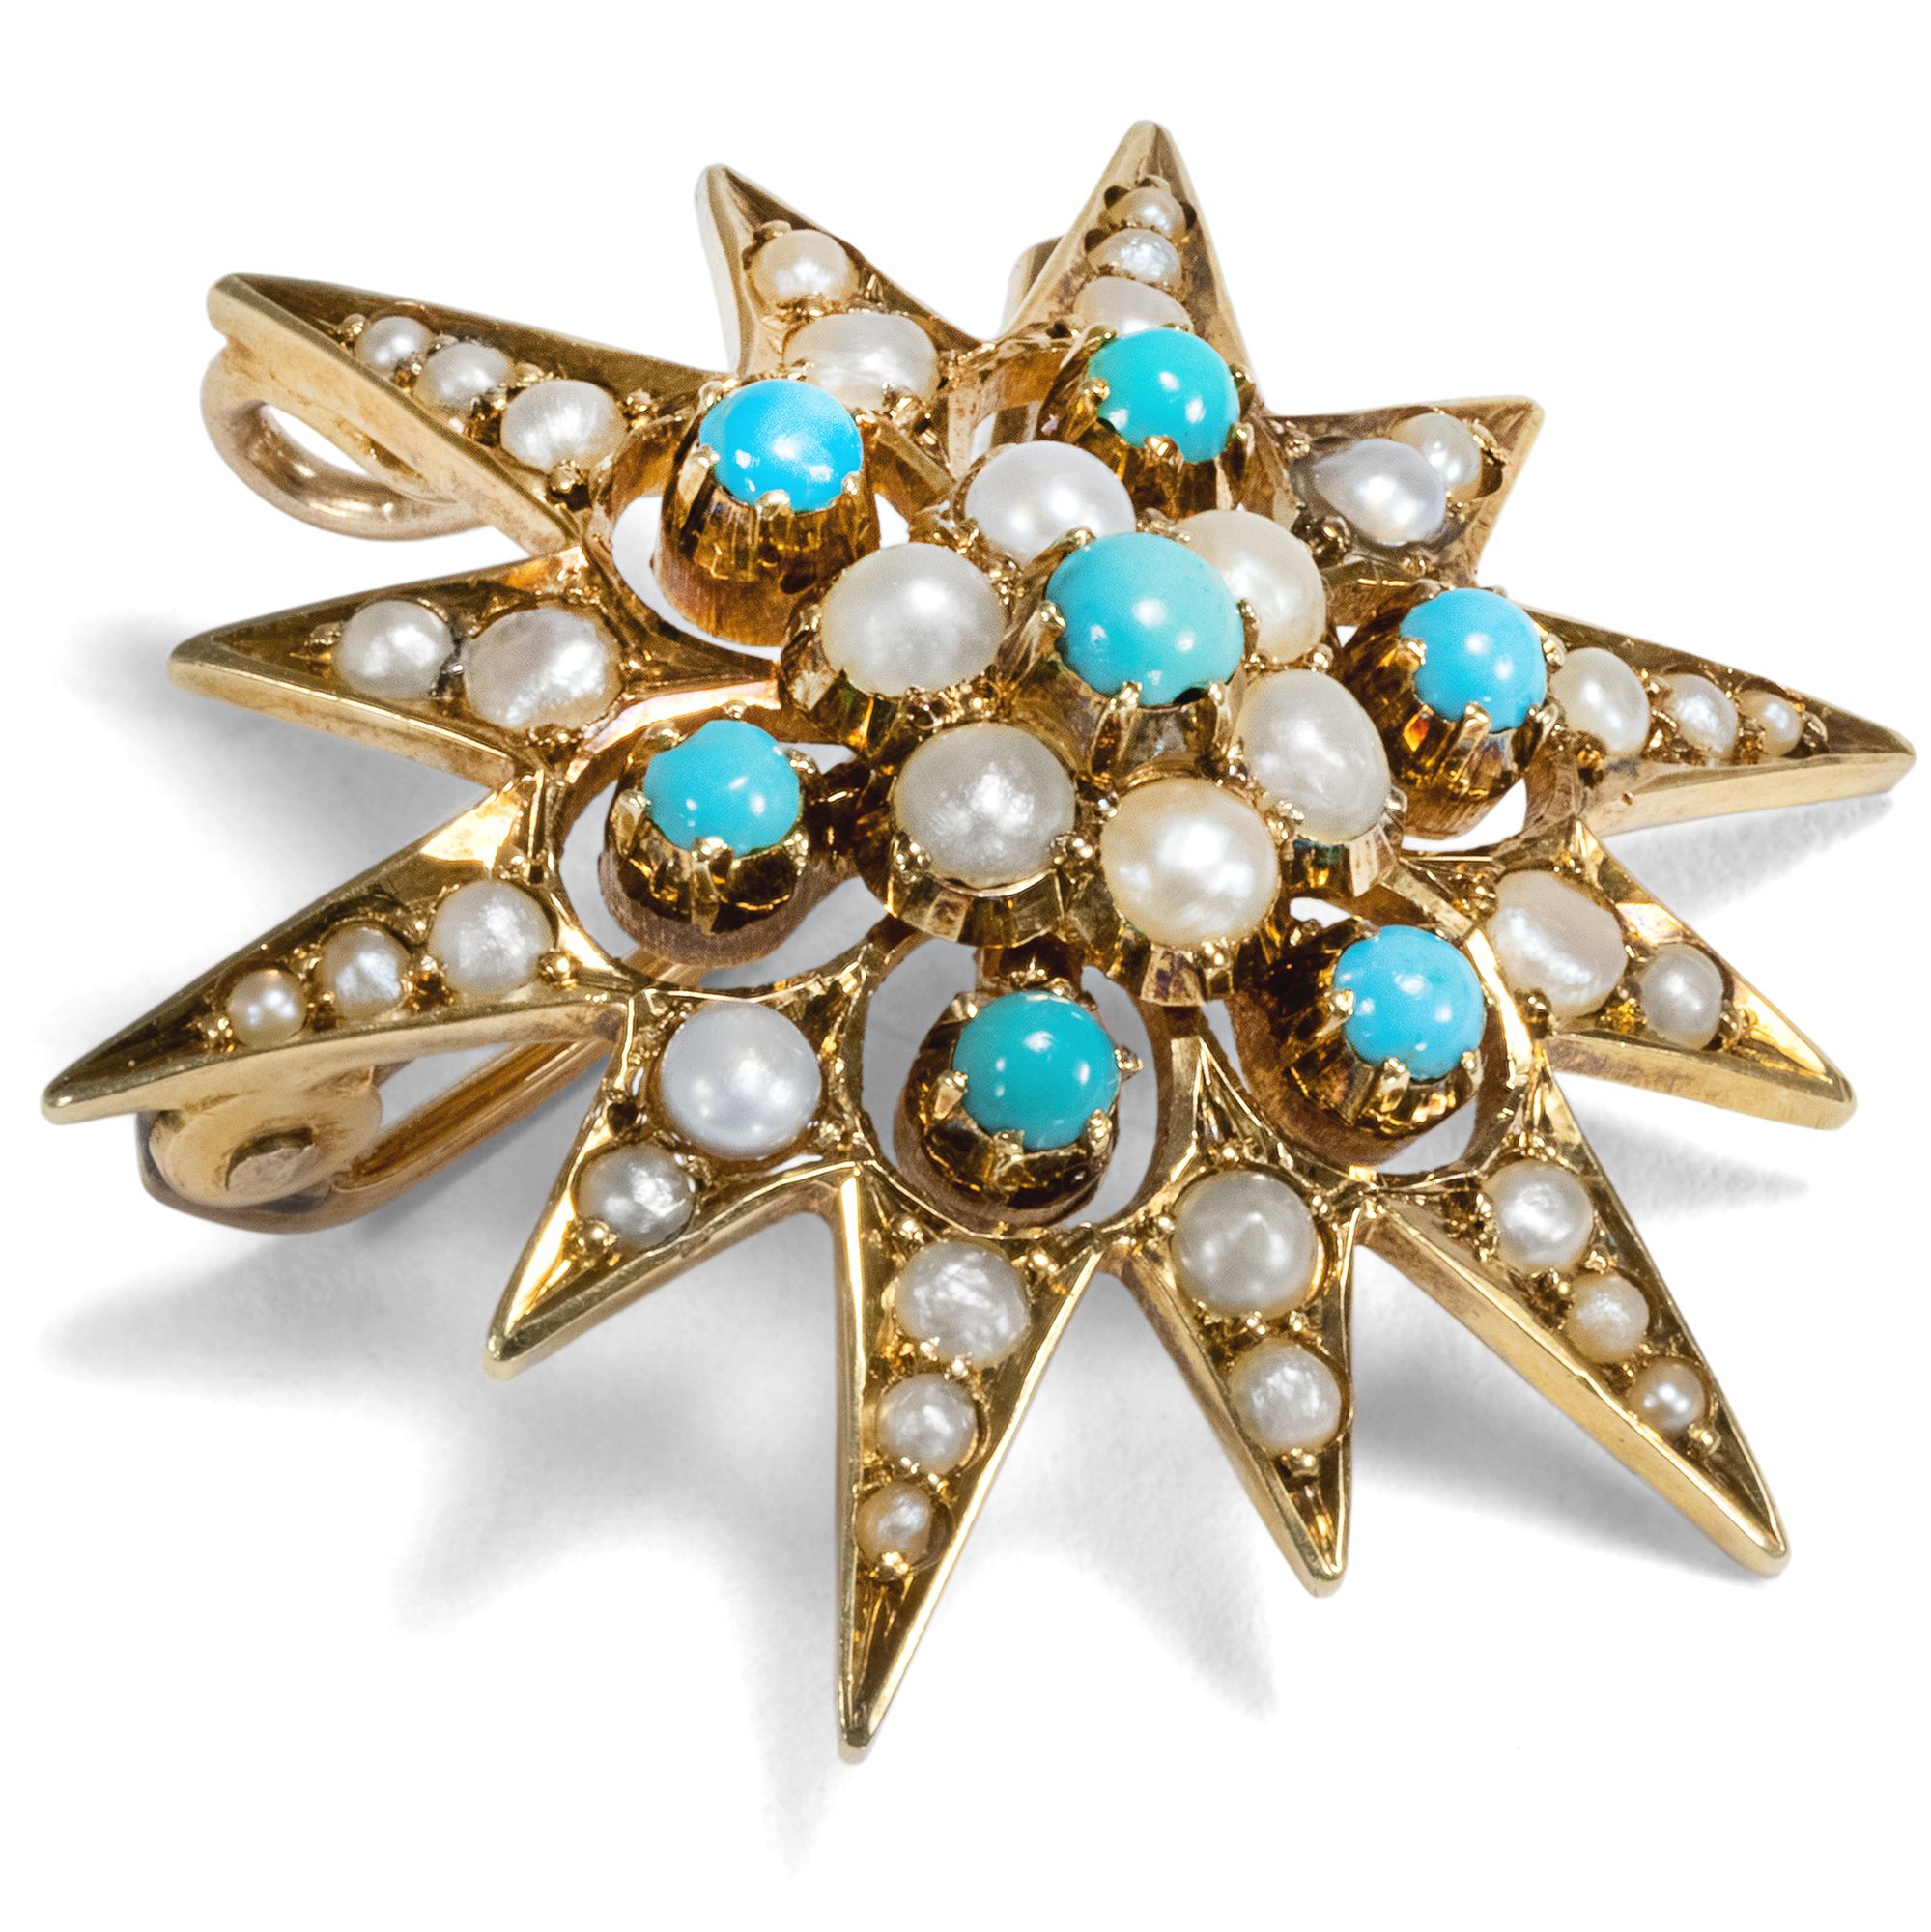 Antique pendant brooch with turquoises & pearls, Great Britain circa 1890